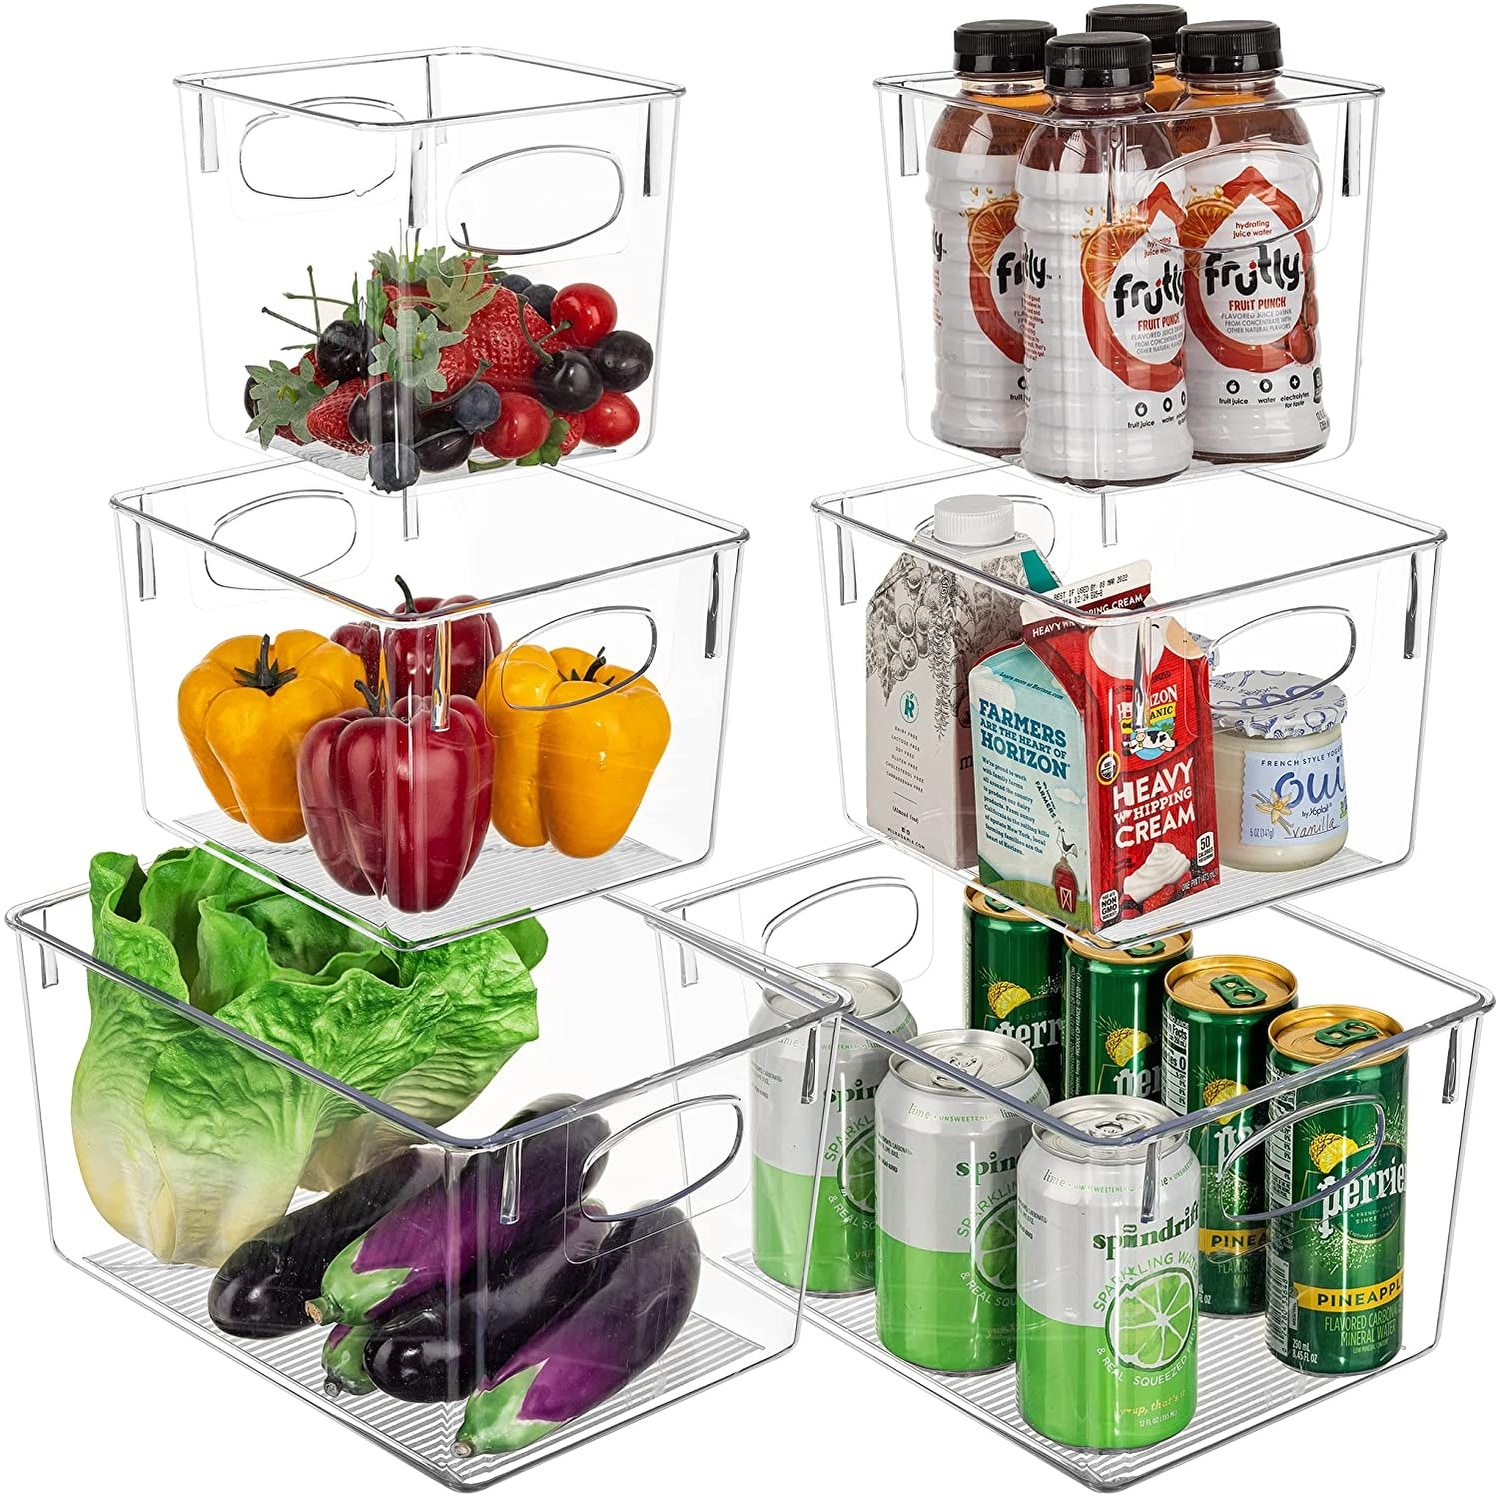 https://ak1.ostkcdn.com/images/products/is/images/direct/f6d3ee0d1d51f3a3f5c7f5f40c6a73740a63be2b/Clear-Plastic-Storage-Bin-Container-Set-Organizer-for-Kitchen%2C-Fridge-and-Pantry.jpg